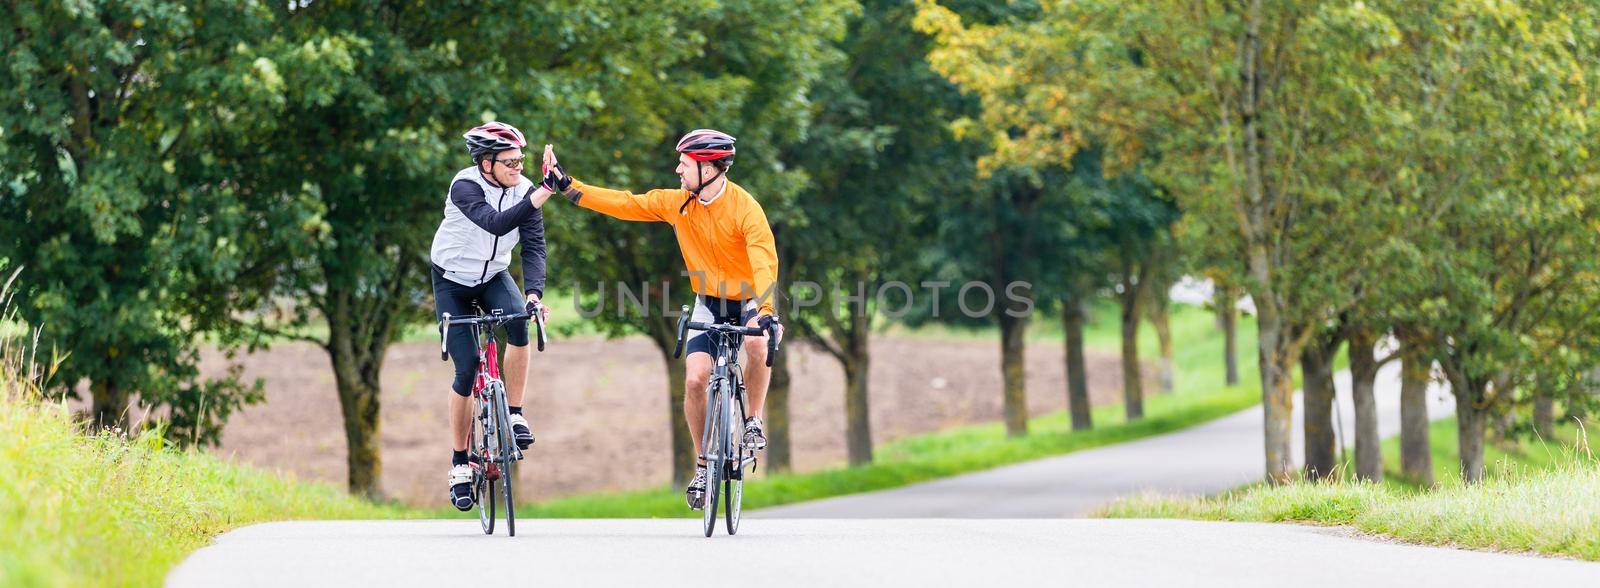 Racing cyclists after sport and fitness workout giving high five in finish